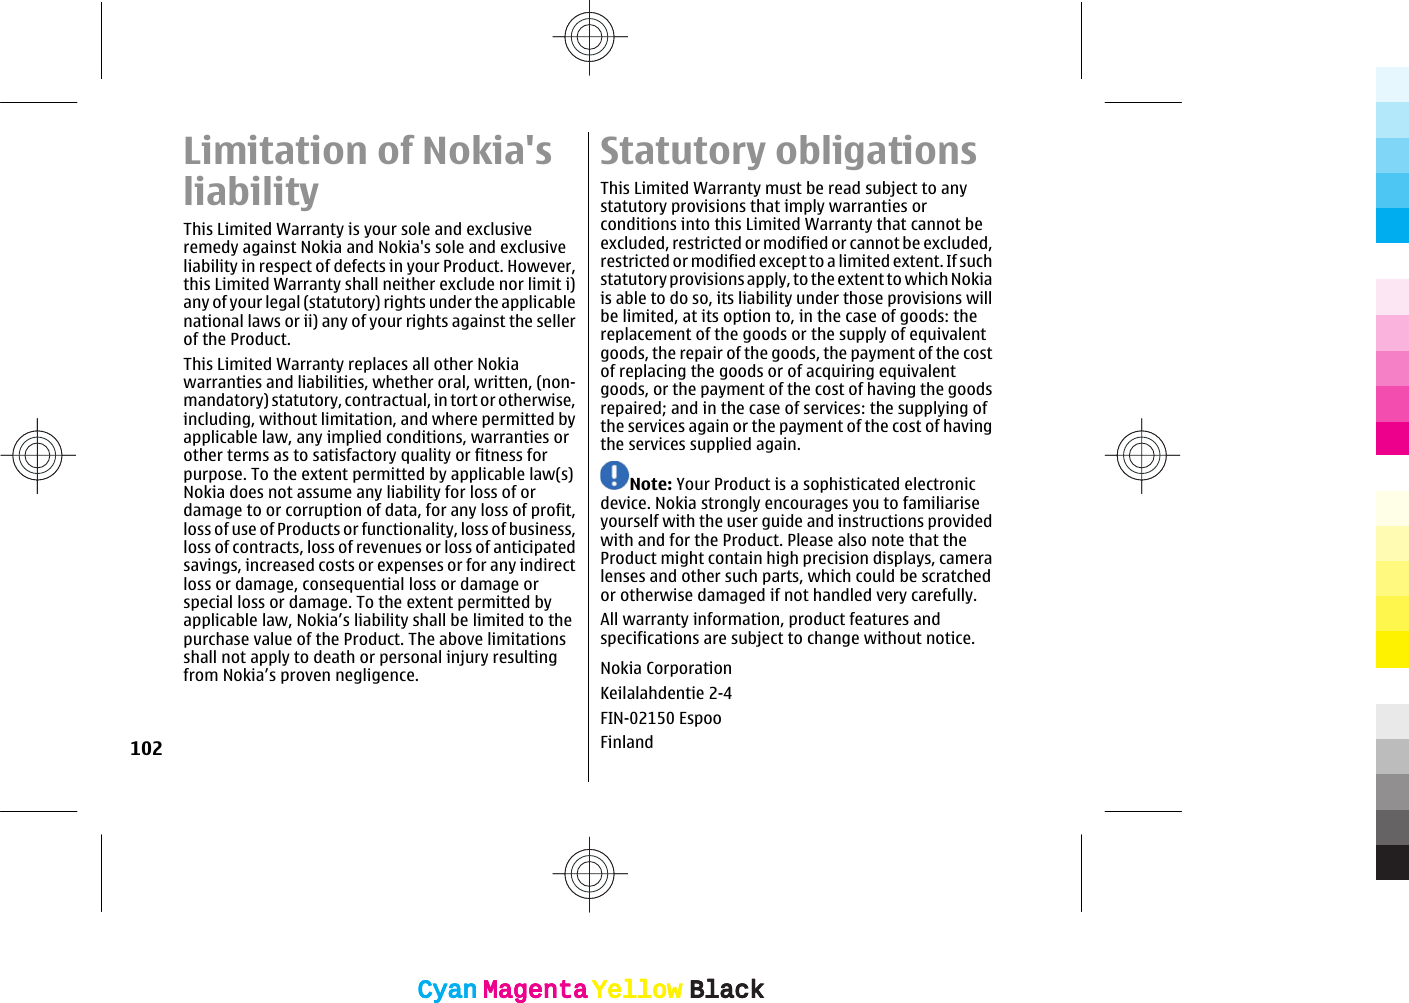 Limitation of Nokia&apos;sliabilityThis Limited Warranty is your sole and exclusiveremedy against Nokia and Nokia&apos;s sole and exclusiveliability in respect of defects in your Product. However,this Limited Warranty shall neither exclude nor limit i)any of your legal (statutory) rights under the applicablenational laws or ii) any of your rights against the sellerof the Product.This Limited Warranty replaces all other Nokiawarranties and liabilities, whether oral, written, (non-mandatory) statutory, contractual, in tort or otherwise,including, without limitation, and where permitted byapplicable law, any implied conditions, warranties orother terms as to satisfactory quality or fitness forpurpose. To the extent permitted by applicable law(s)Nokia does not assume any liability for loss of ordamage to or corruption of data, for any loss of profit,loss of use of Products or functionality, loss of business,loss of contracts, loss of revenues or loss of anticipatedsavings, increased costs or expenses or for any indirectloss or damage, consequential loss or damage orspecial loss or damage. To the extent permitted byapplicable law, Nokia’s liability shall be limited to thepurchase value of the Product. The above limitationsshall not apply to death or personal injury resultingfrom Nokia’s proven negligence.Statutory obligationsThis Limited Warranty must be read subject to anystatutory provisions that imply warranties orconditions into this Limited Warranty that cannot beexcluded, restricted or modified or cannot be excluded,restricted or modified except to a limited extent. If suchstatutory provisions apply, to the extent to which Nokiais able to do so, its liability under those provisions willbe limited, at its option to, in the case of goods: thereplacement of the goods or the supply of equivalentgoods, the repair of the goods, the payment of the costof replacing the goods or of acquiring equivalentgoods, or the payment of the cost of having the goodsrepaired; and in the case of services: the supplying ofthe services again or the payment of the cost of havingthe services supplied again.Note: Your Product is a sophisticated electronicdevice. Nokia strongly encourages you to familiariseyourself with the user guide and instructions providedwith and for the Product. Please also note that theProduct might contain high precision displays, cameralenses and other such parts, which could be scratchedor otherwise damaged if not handled very carefully.All warranty information, product features andspecifications are subject to change without notice.Nokia CorporationKeilalahdentie 2-4FIN-02150 EspooFinland102CyanCyanMagentaMagentaYellowYellowBlackBlackCyanCyanMagentaMagentaYellowYellowBlackBlack